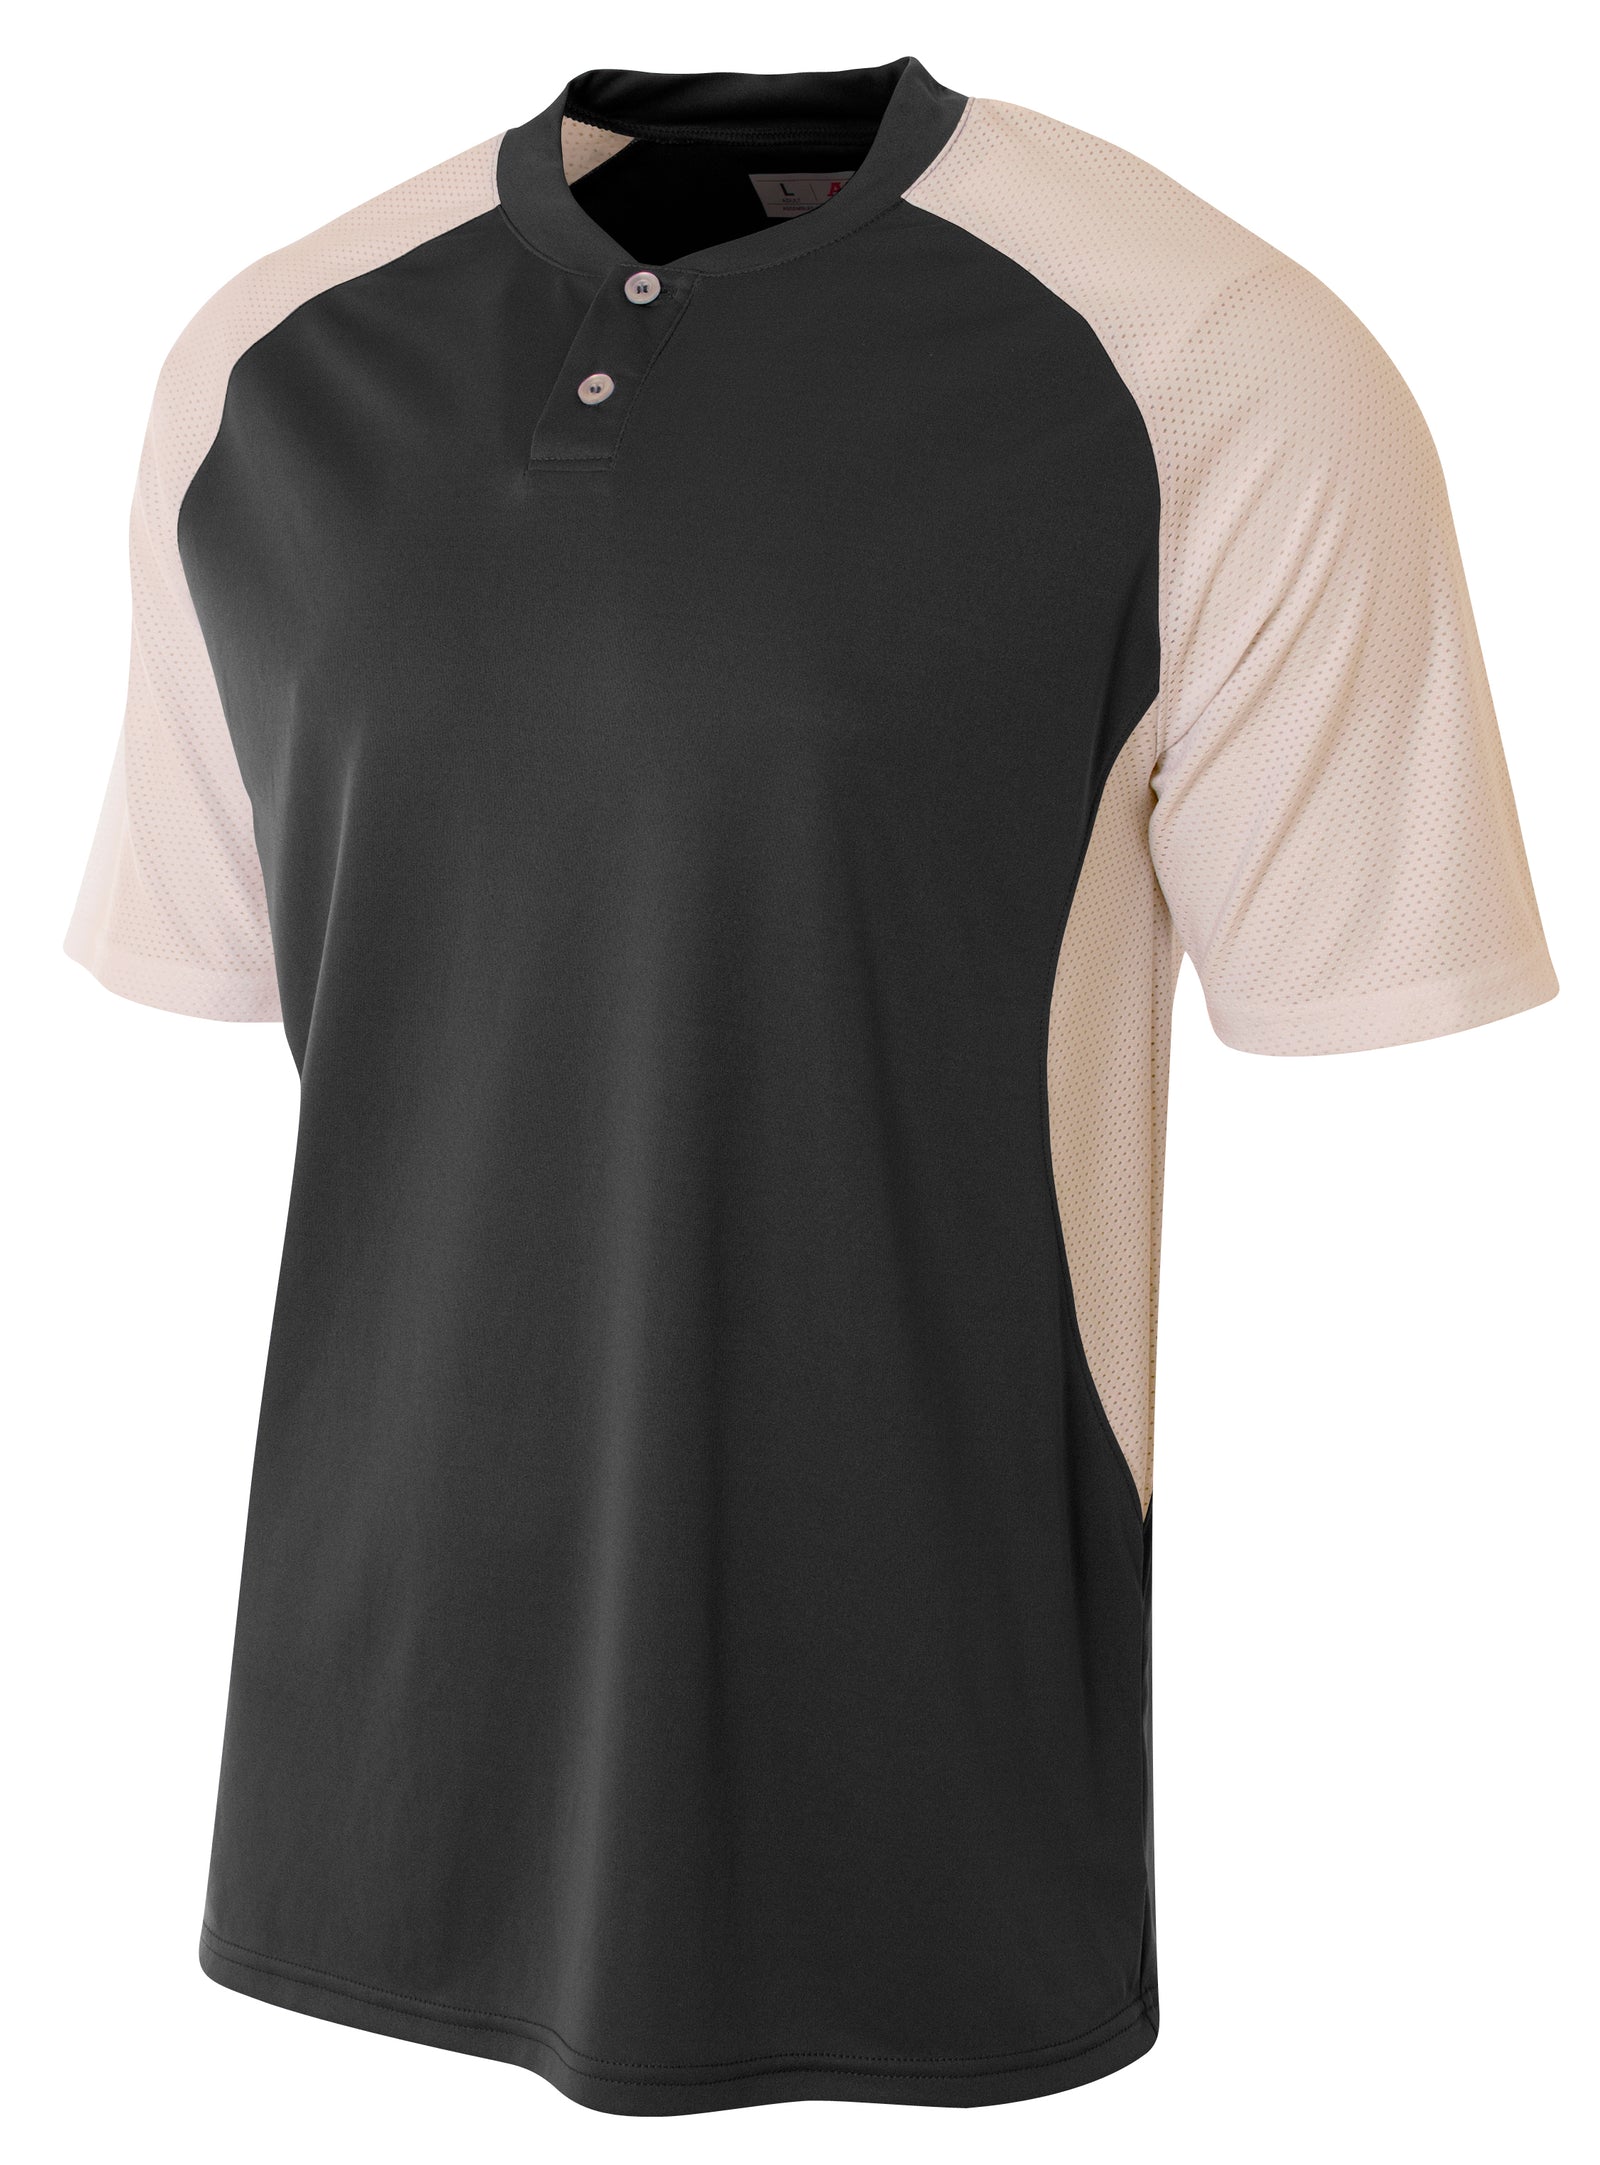 Black/white A4 Contrast Henley